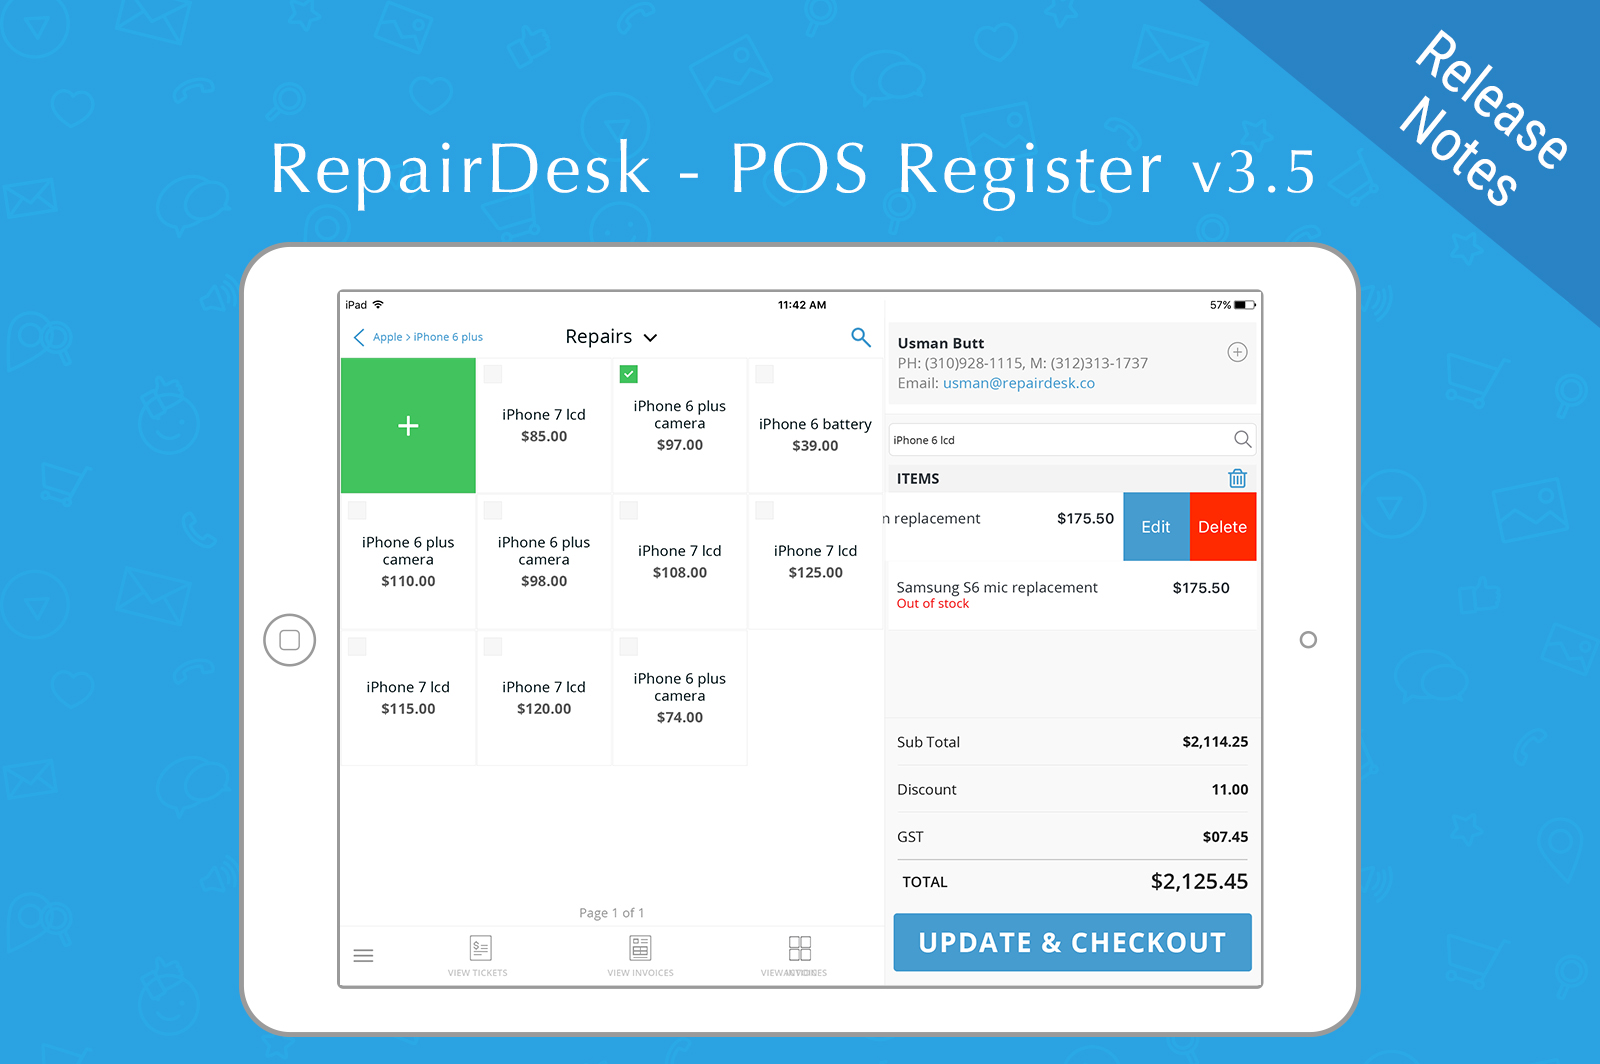 A Whole New Way To Print With Epson Printers Ipad Pos Register App Release Notes V3 5 Repairdesk Blog